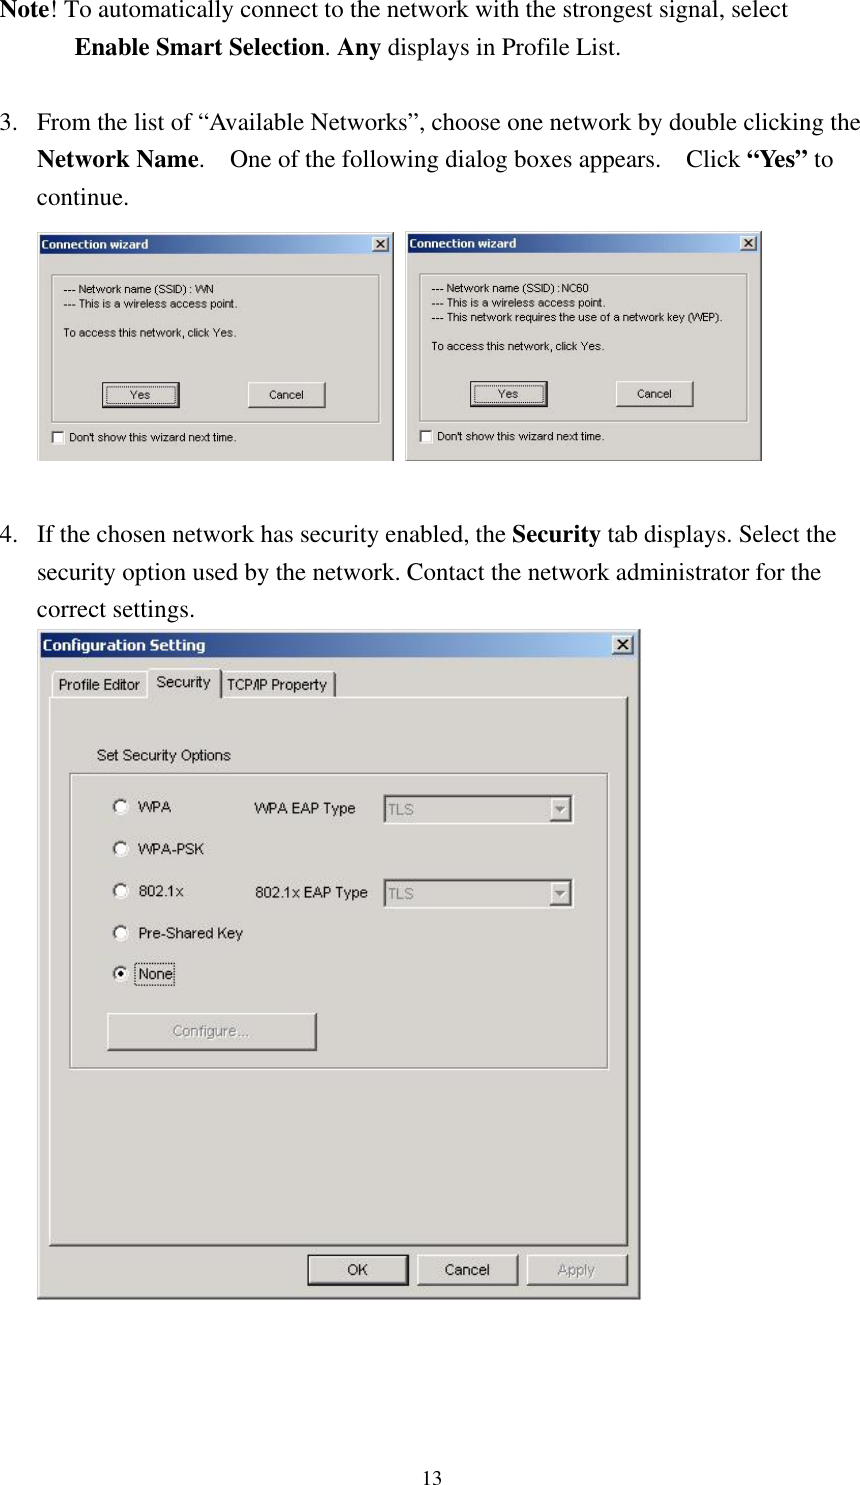  13Note! To automatically connect to the network with the strongest signal, select Enable Smart Selection. Any displays in Profile List.  3. From the list of “Available Networks”, choose one network by double clicking the Network Name.    One of the following dialog boxes appears.    Click “Yes” to continue.     4. If the chosen network has security enabled, the Security tab displays. Select the security option used by the network. Contact the network administrator for the correct settings.     